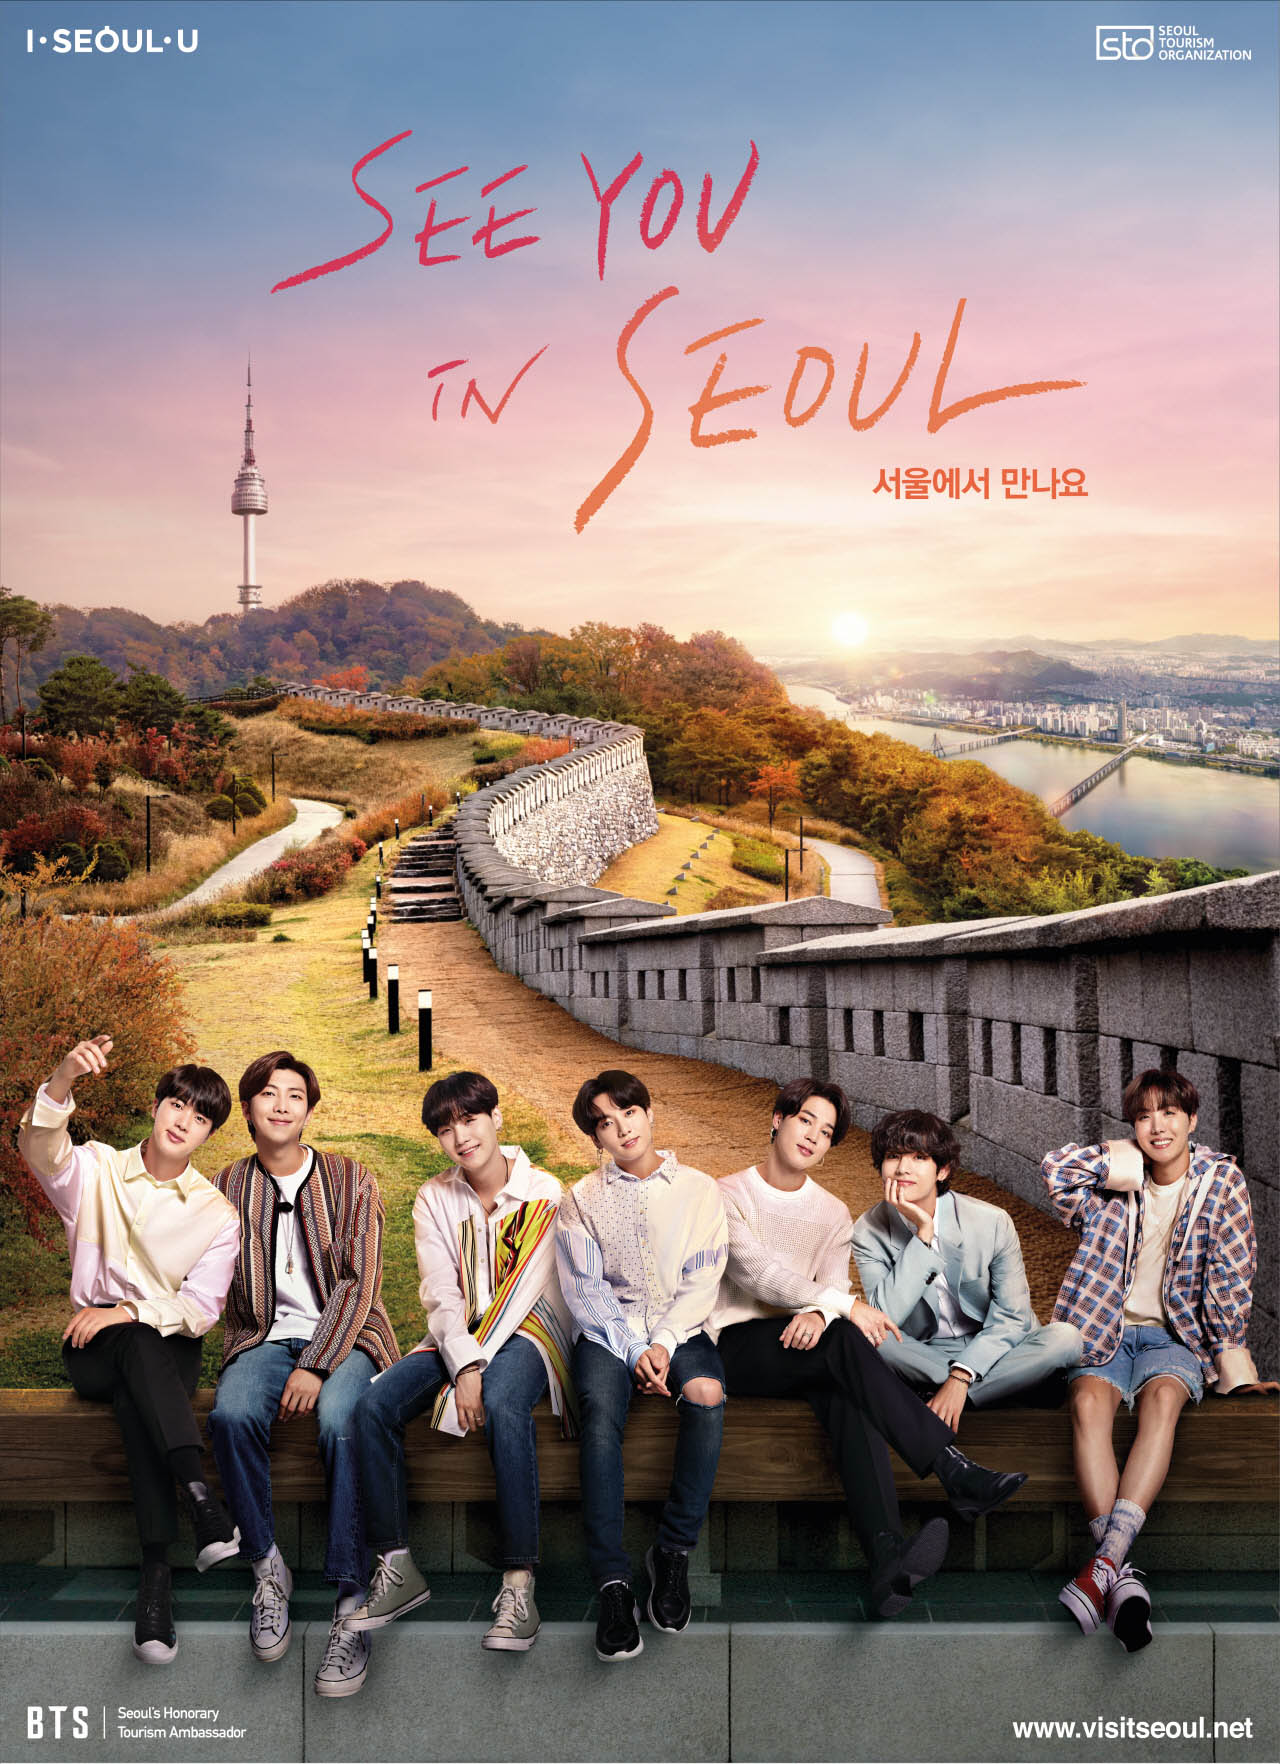 See you in Seoul: BTS promotes Seoul tourism